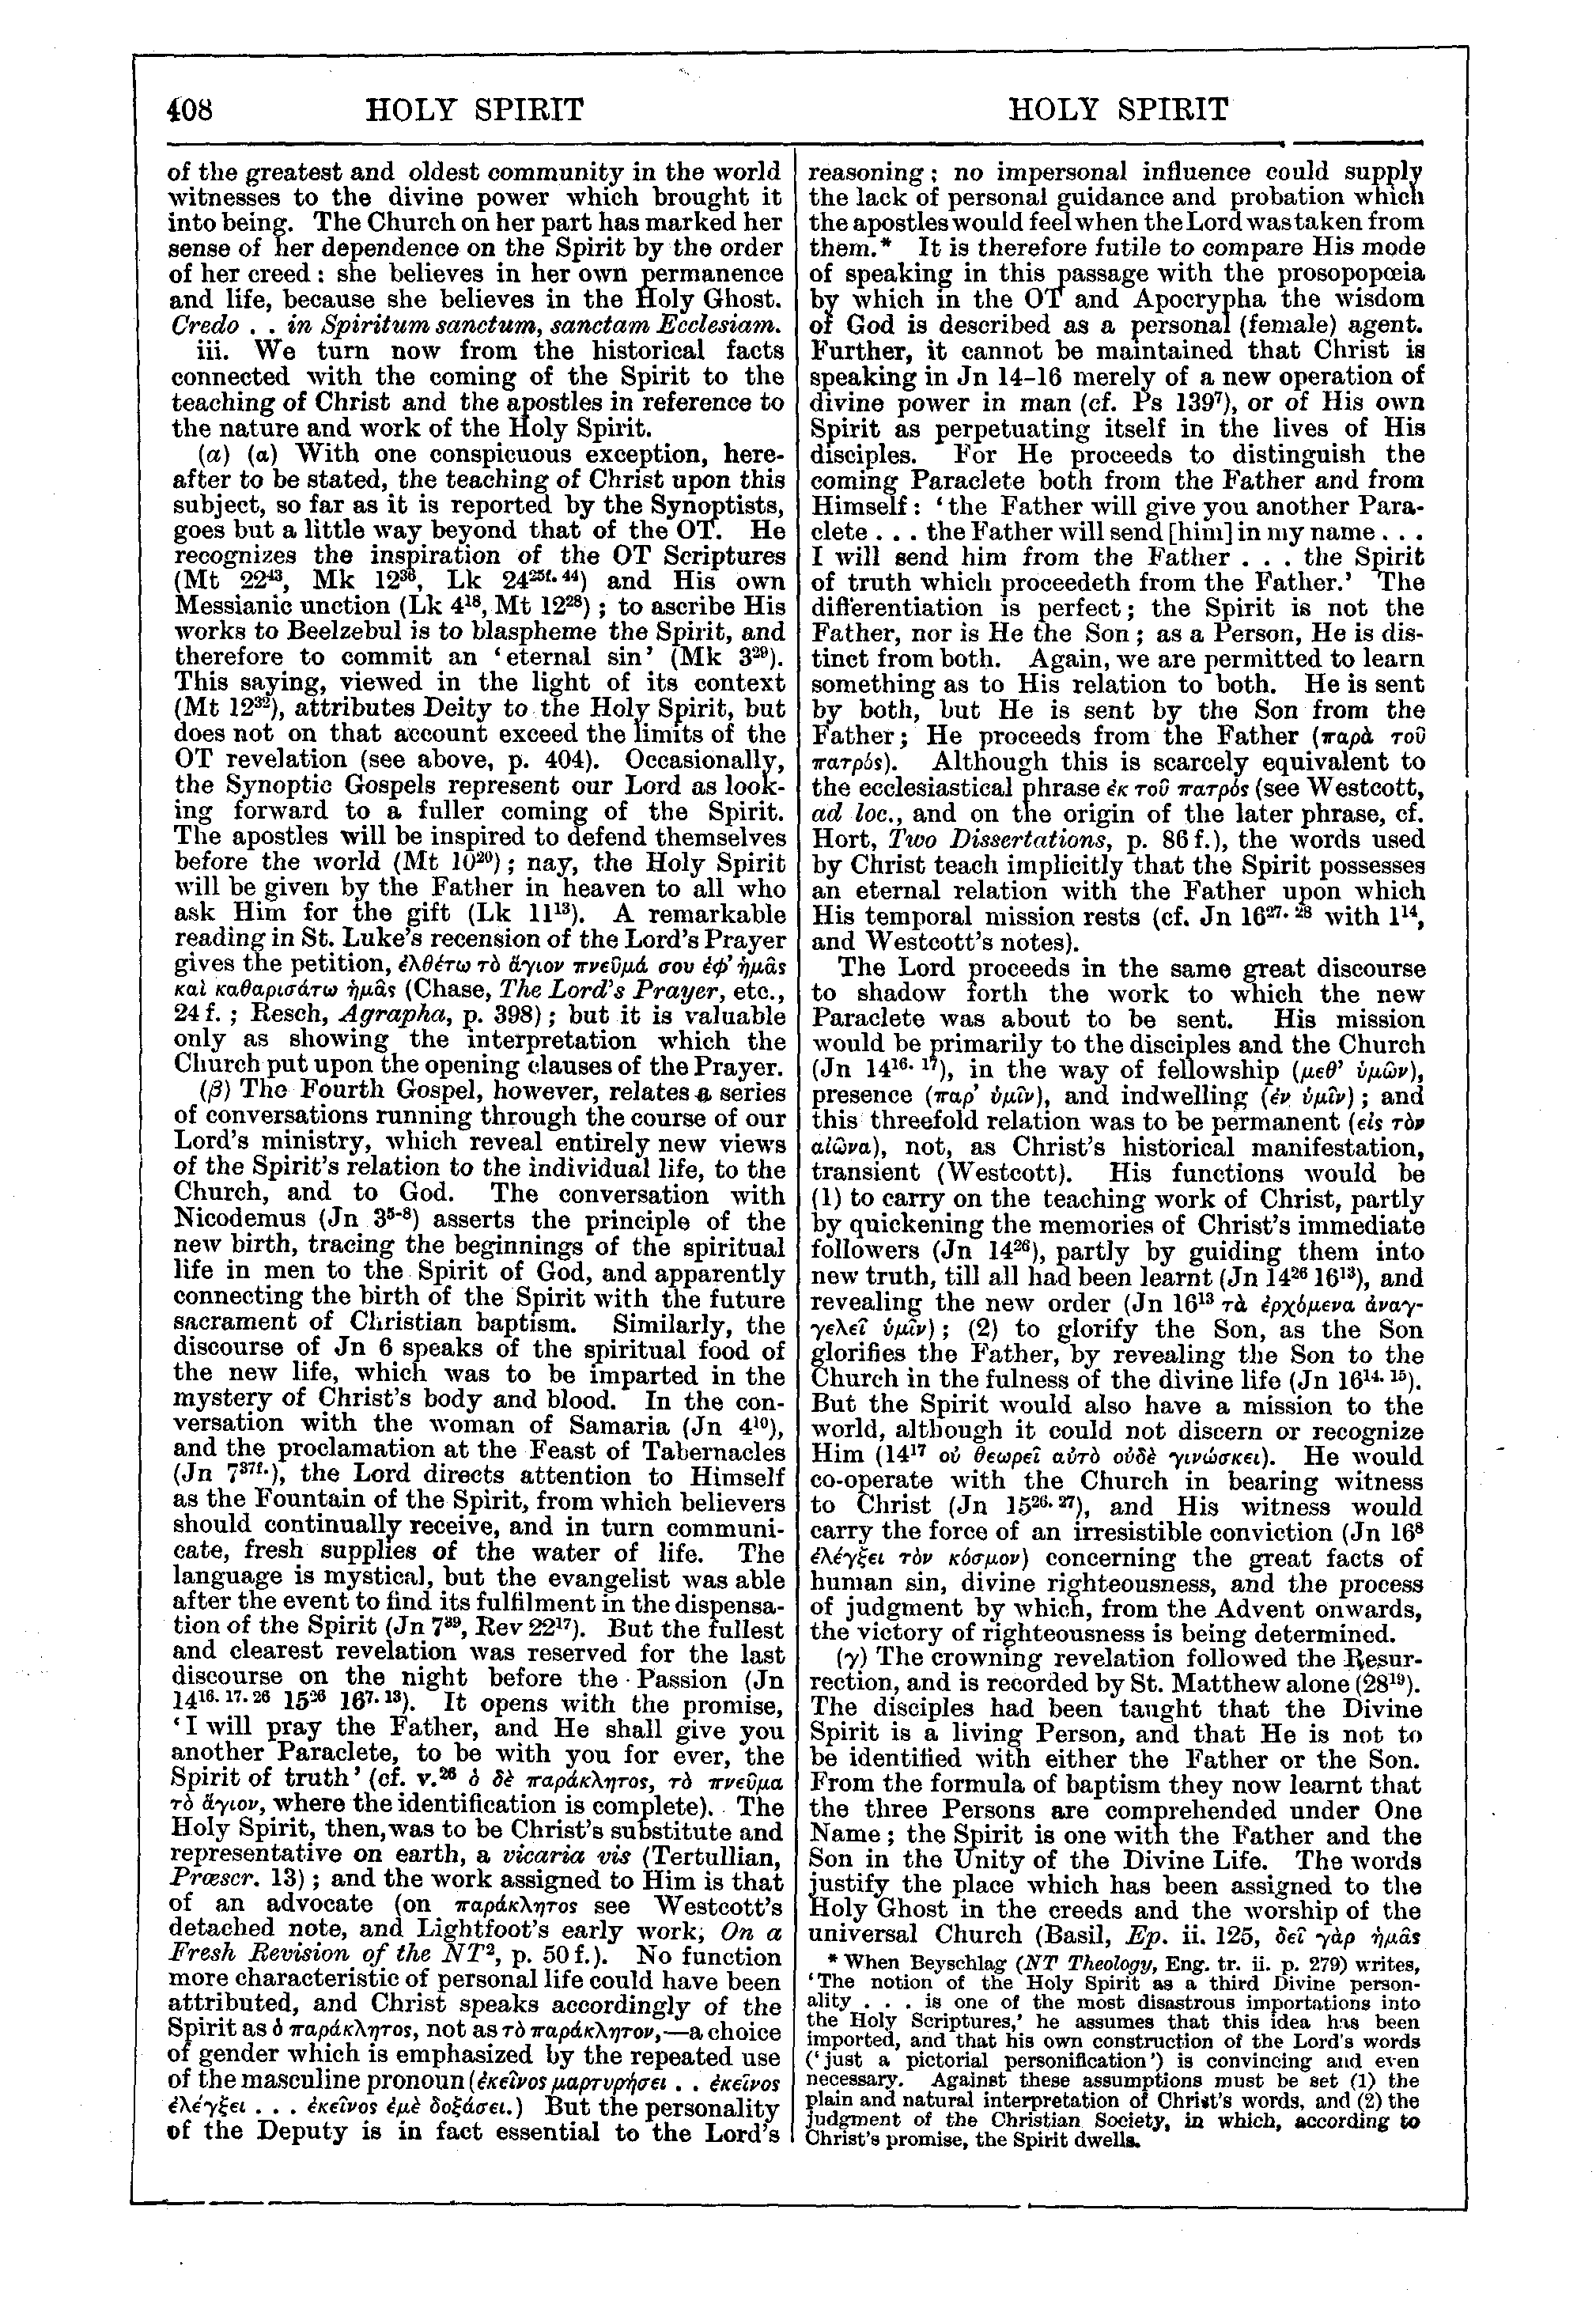 Image of page 408